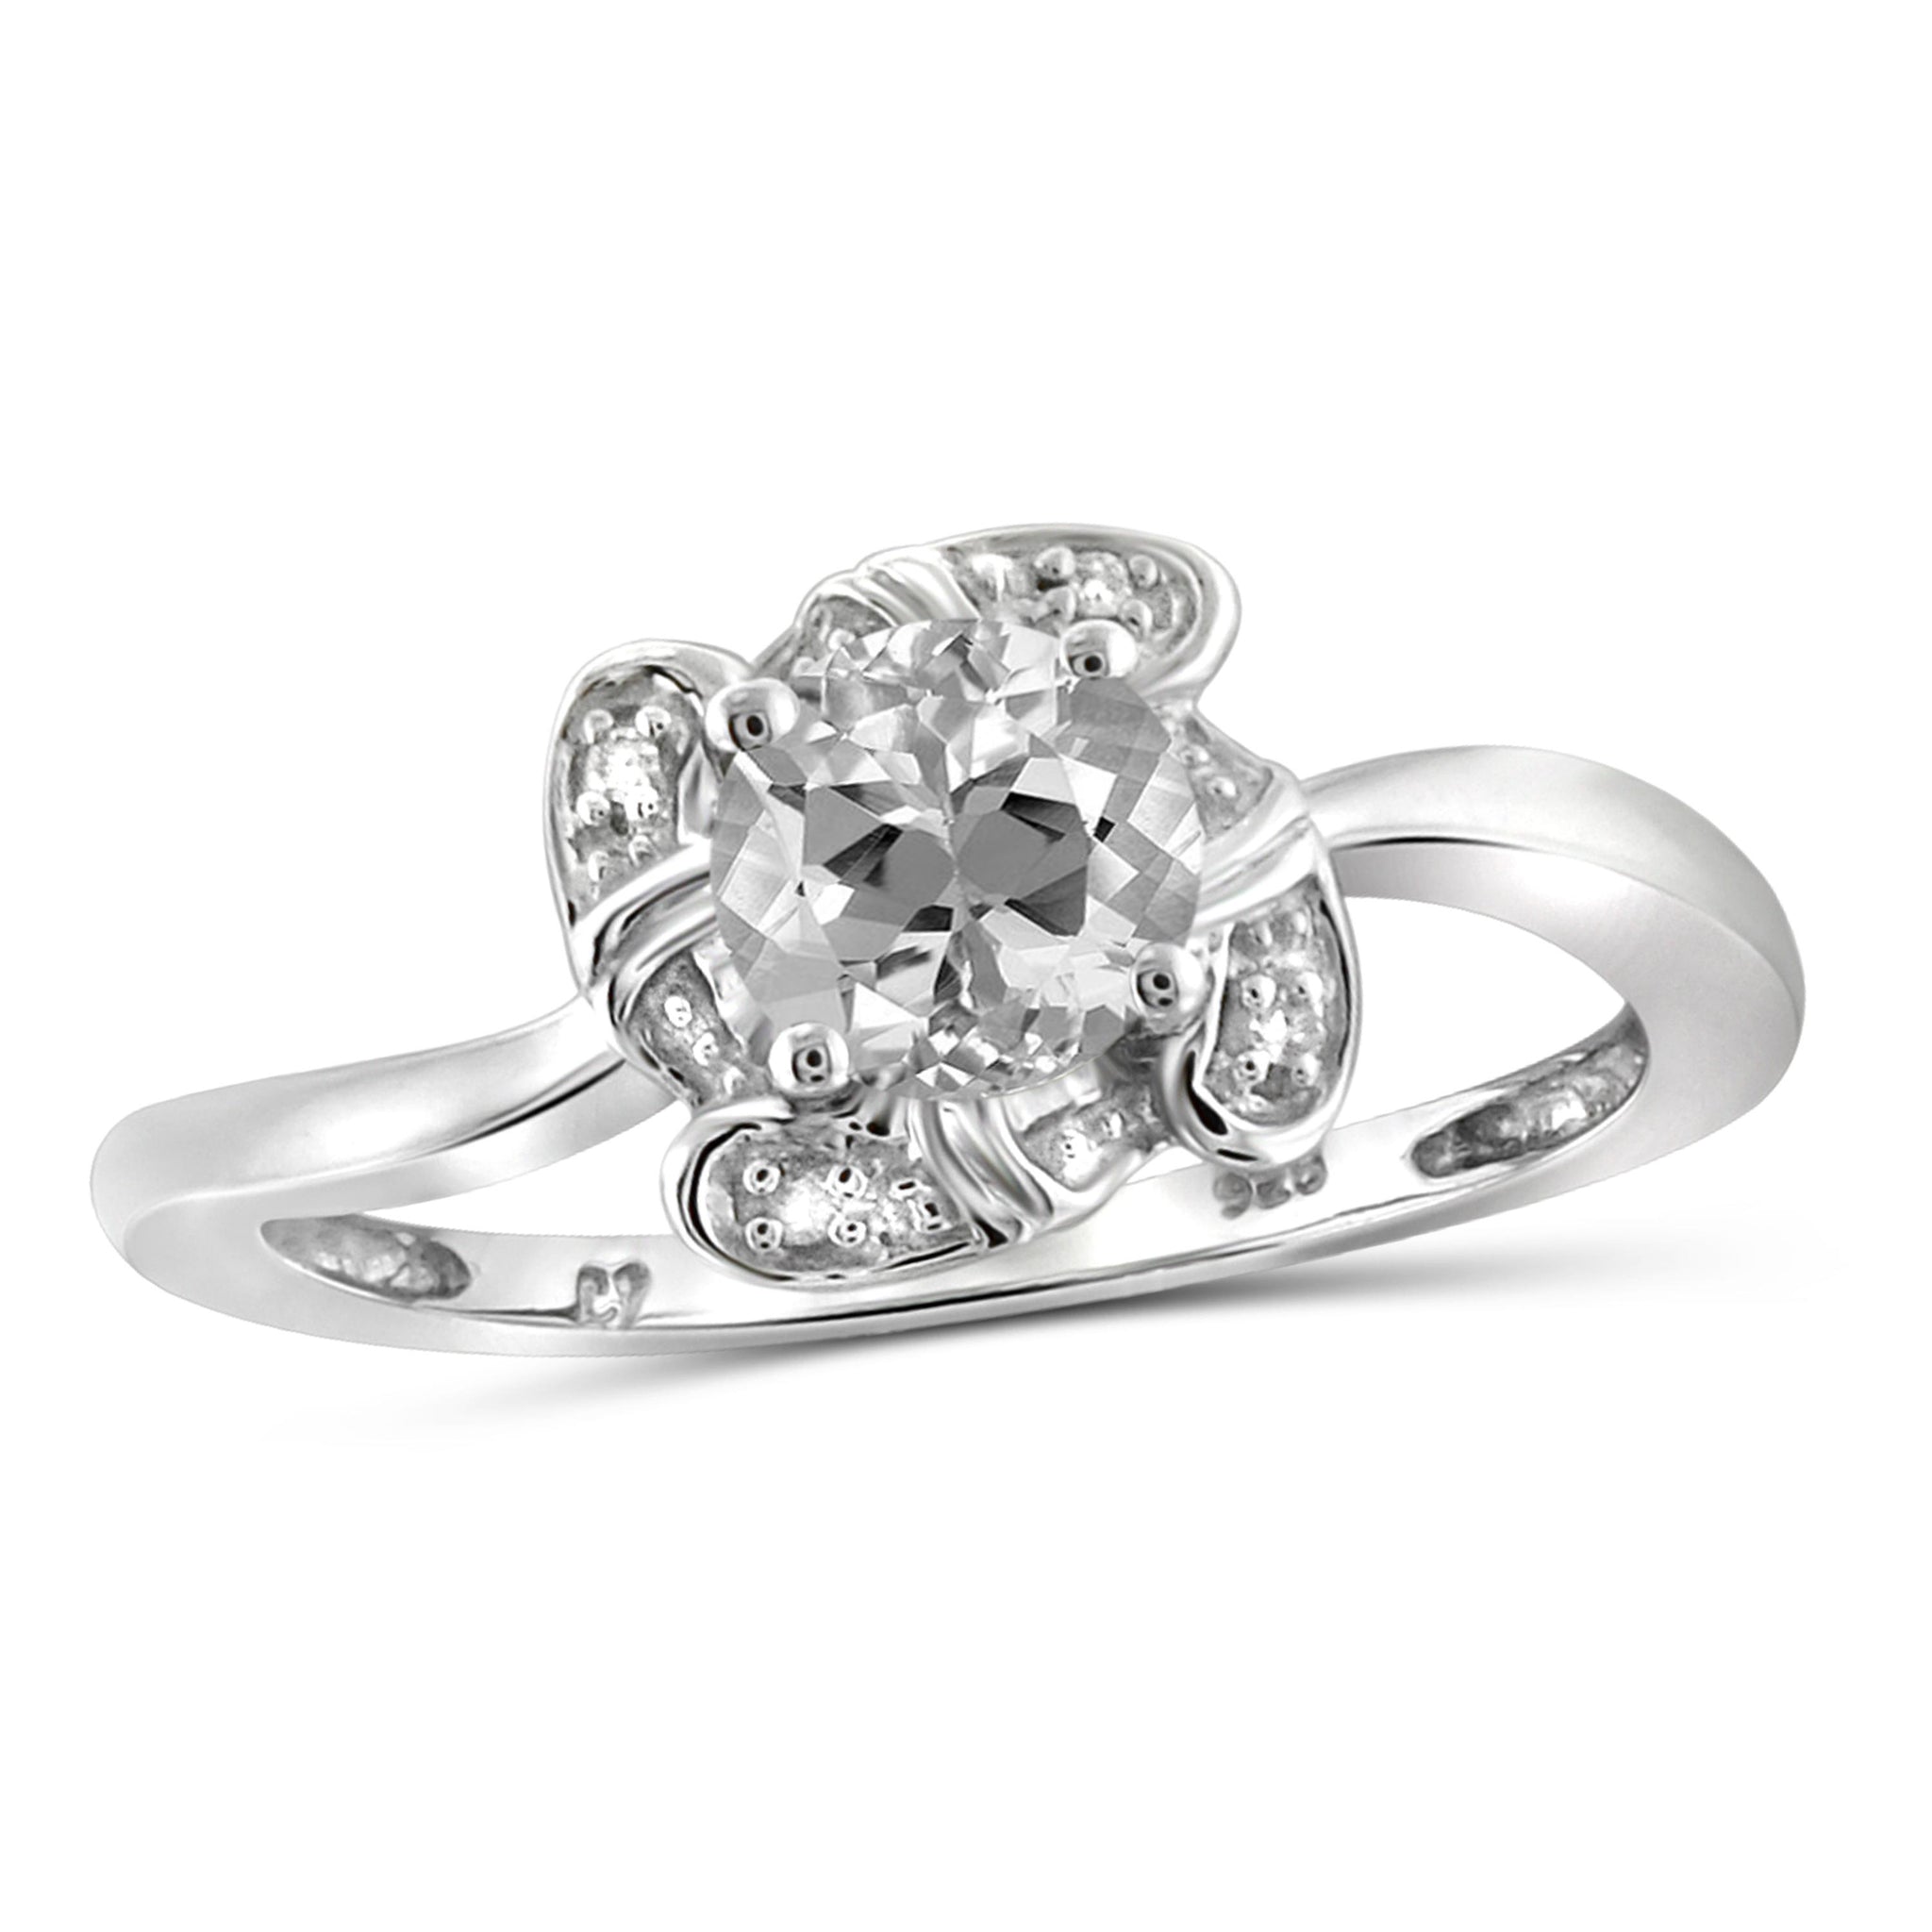 JewelonFire 1.00 Carat T.G.W. White Topaz And White Diamond Accent Sterling Silver Ring - Assorted Colors